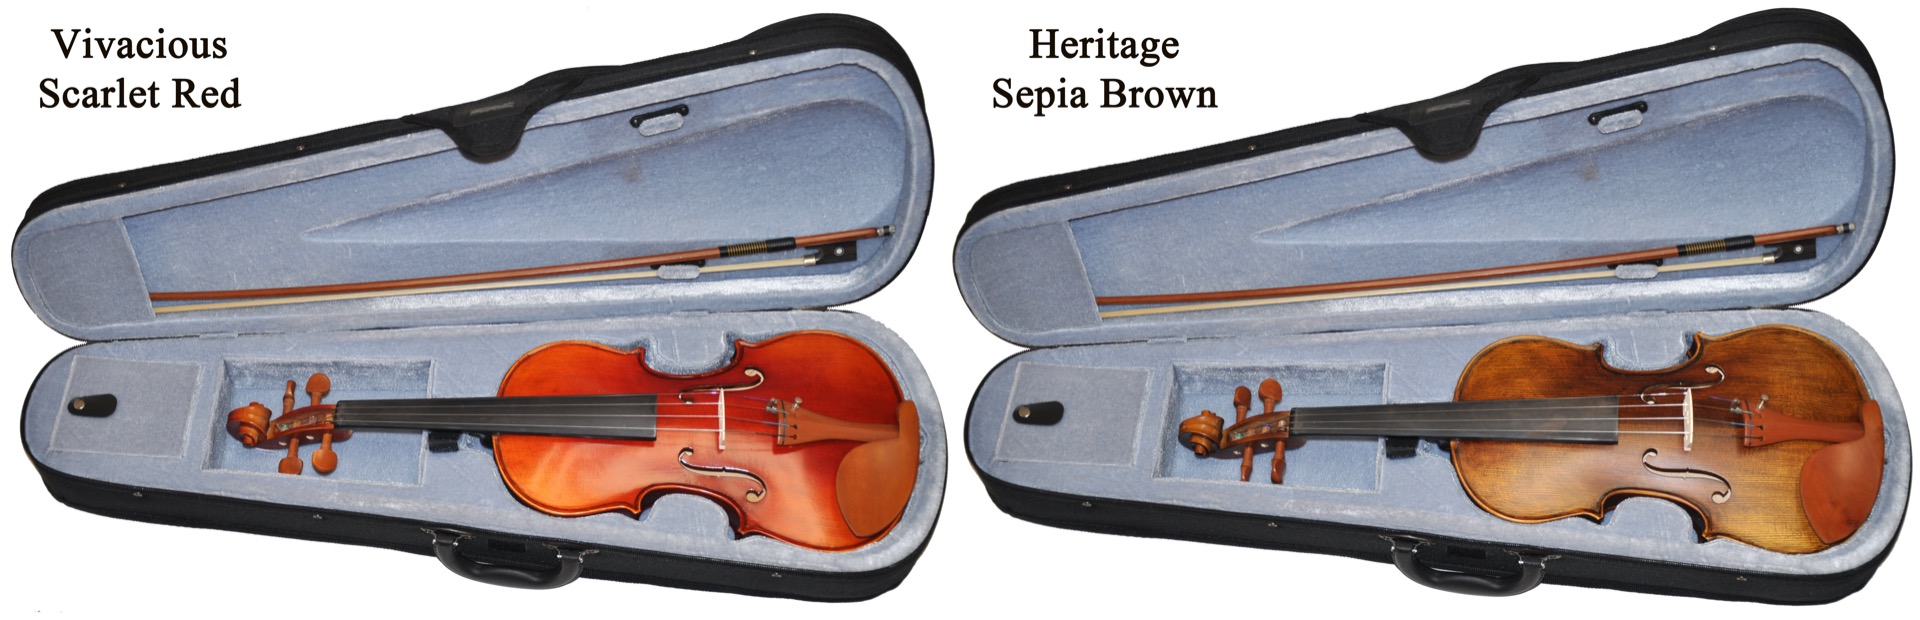 discontinued violin outfits in red and brown finishes